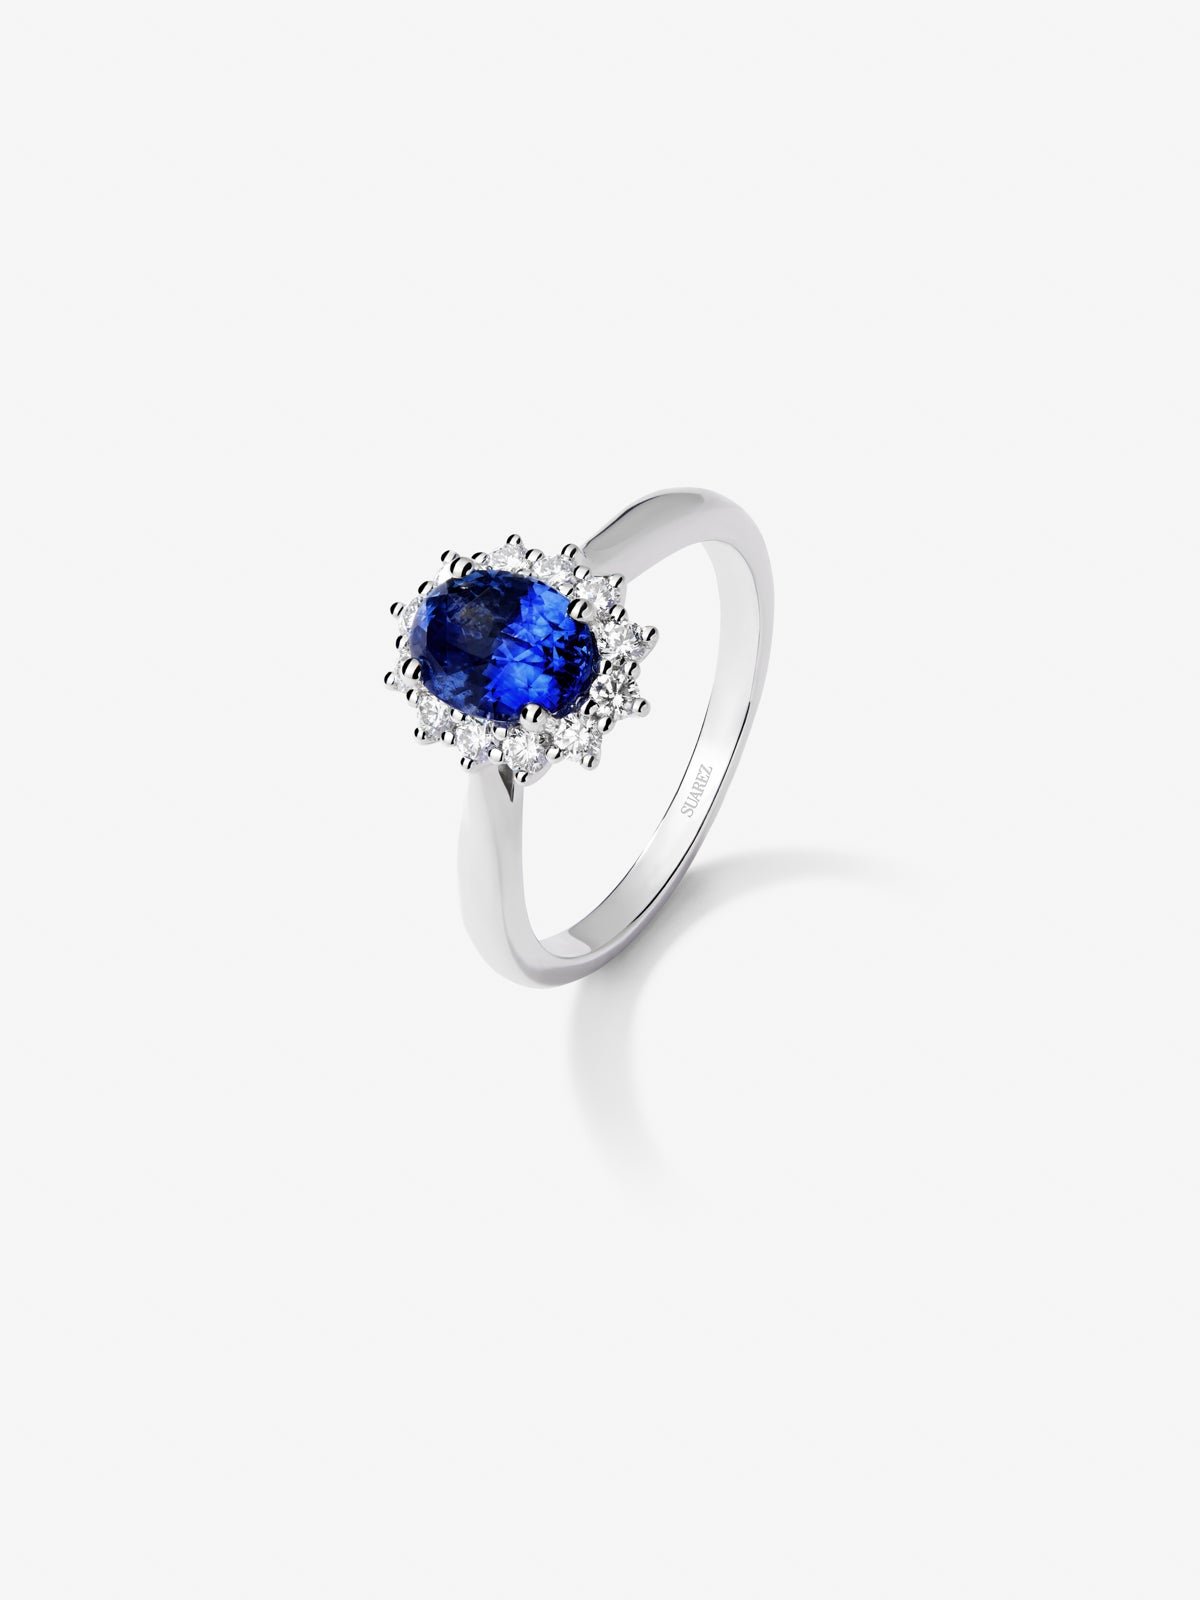 18K white gold ring with oval-cut blue sapphire of 1.34 cts and 12 brilliant-cut diamonds with a total of 0.53 cts